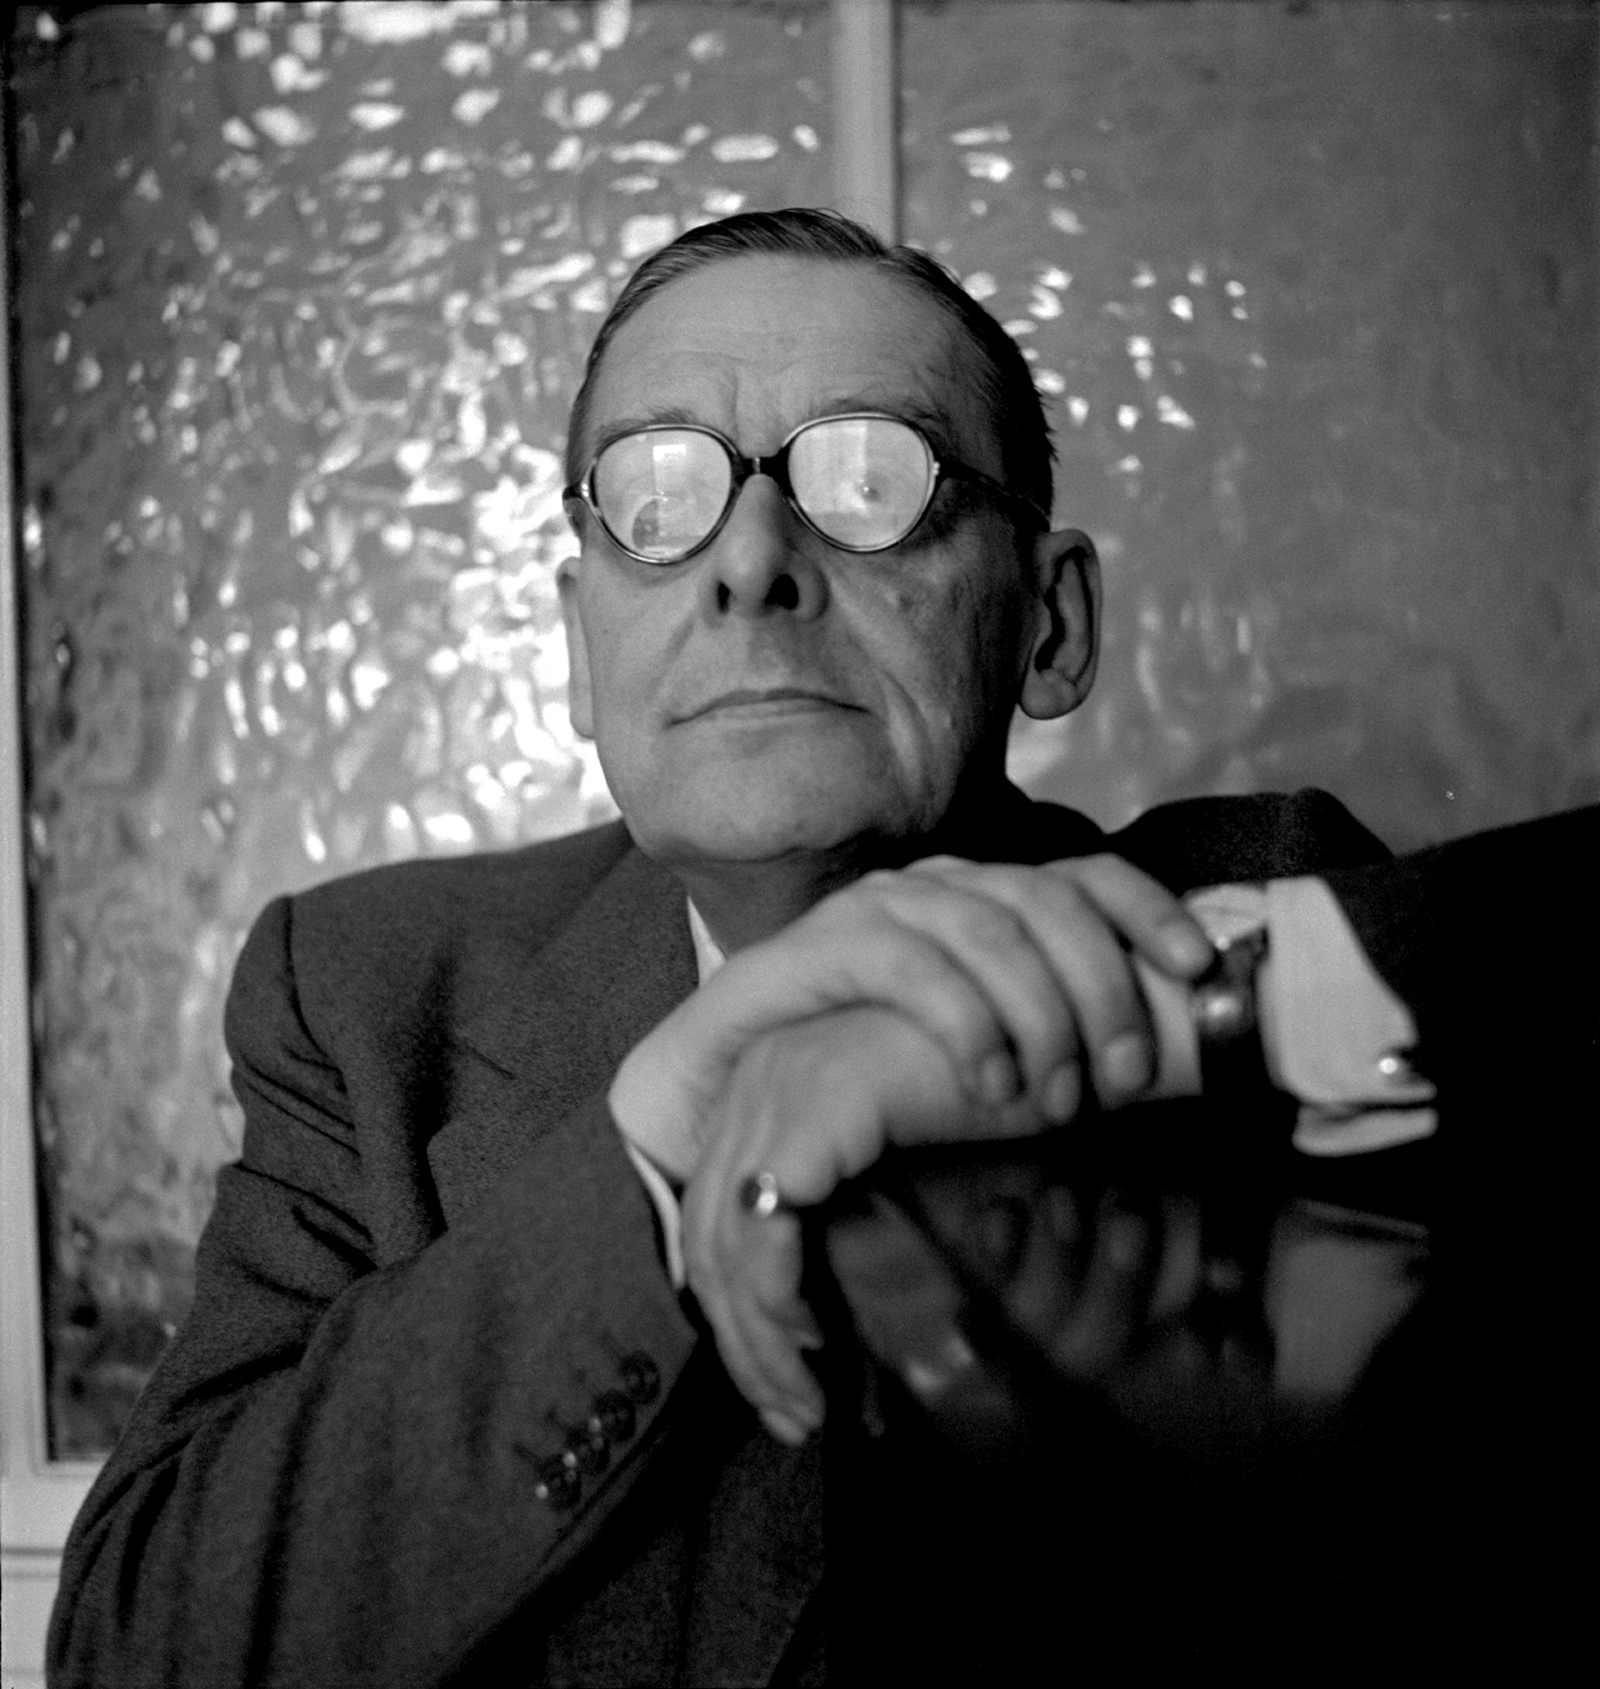 T. S. Eliot, 1956; photograph by Cecil Beaton from Mark Holborn’s book Beaton: Photographs, just published by Abrams with an introduction by Annie Leibovitz